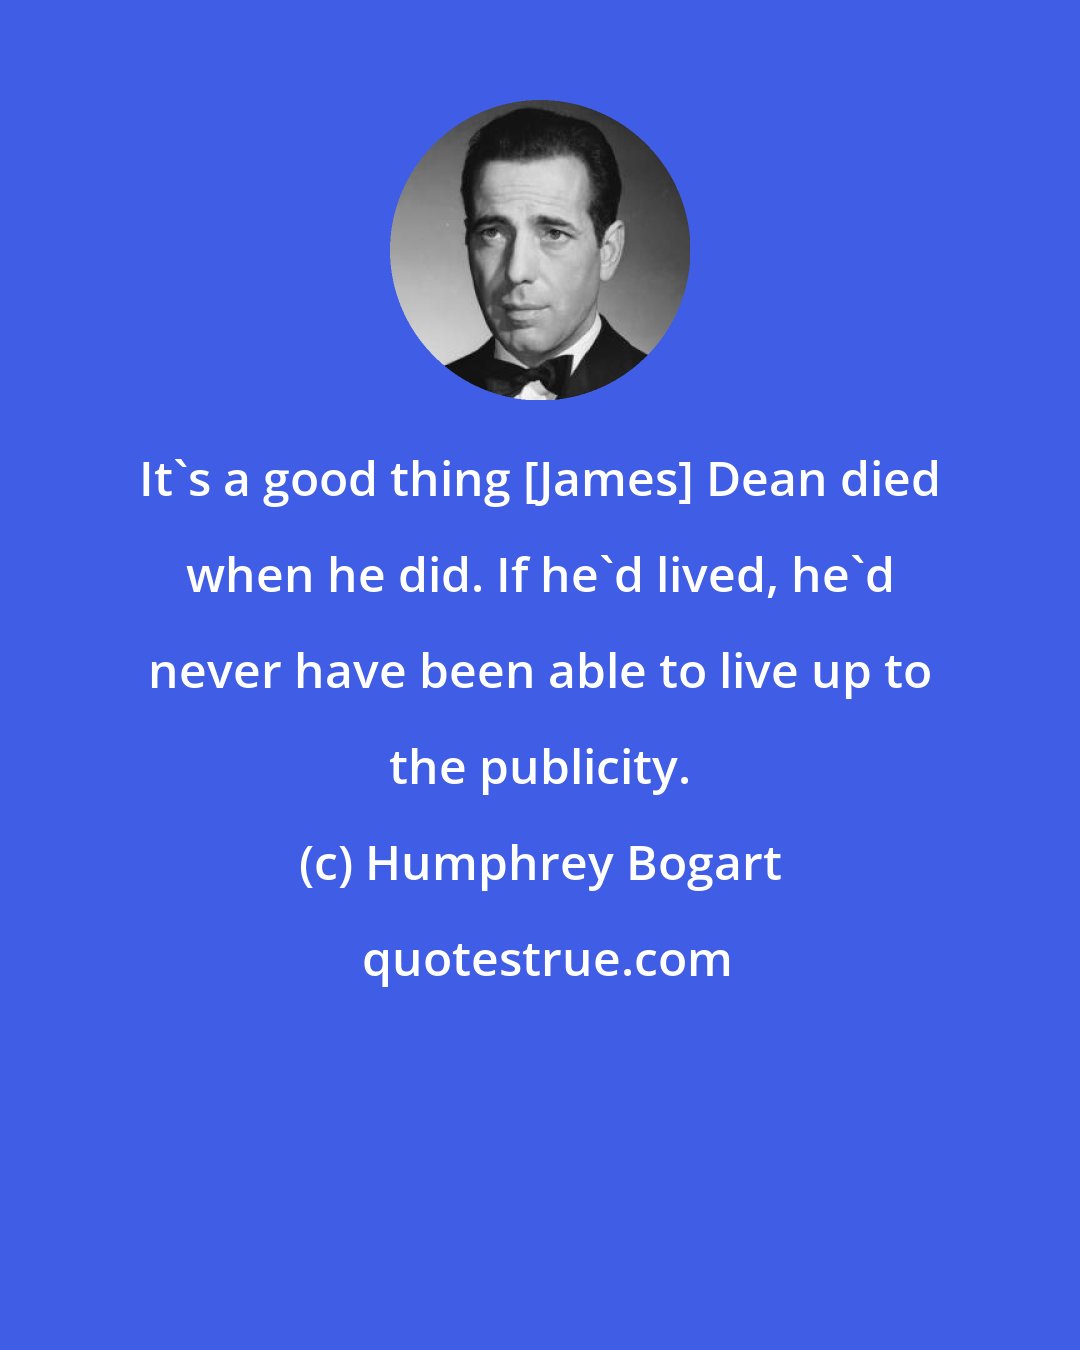 Humphrey Bogart: It's a good thing [James] Dean died when he did. If he'd lived, he'd never have been able to live up to the publicity.